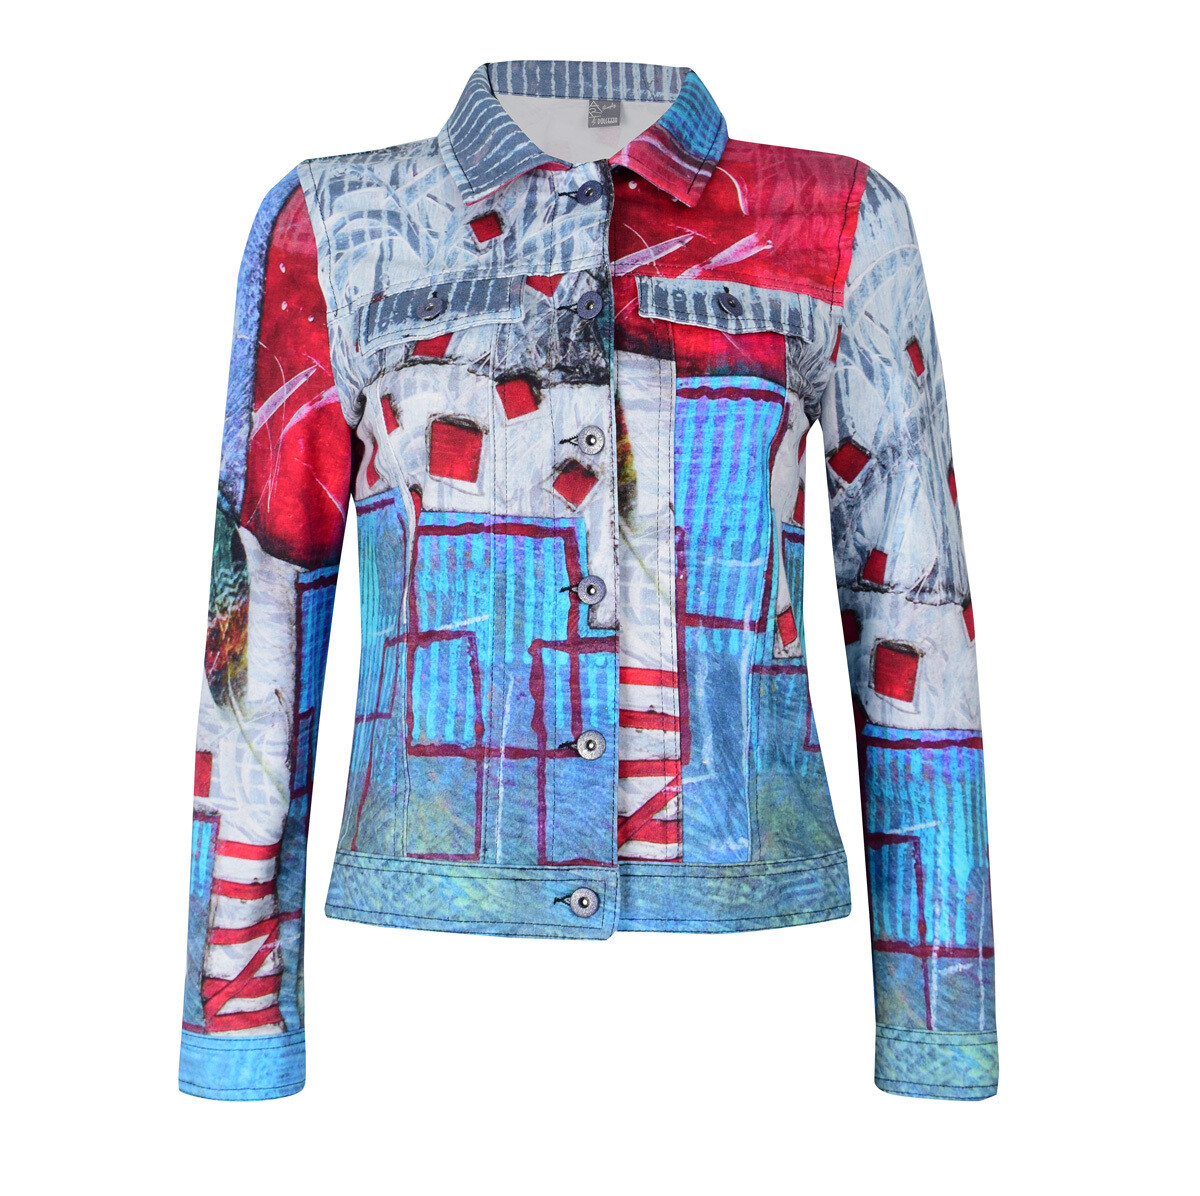 Simply Art Dolcezza: Only Love Spiritually Square Soft Denim Abstract Art Jacket SOLD OUT